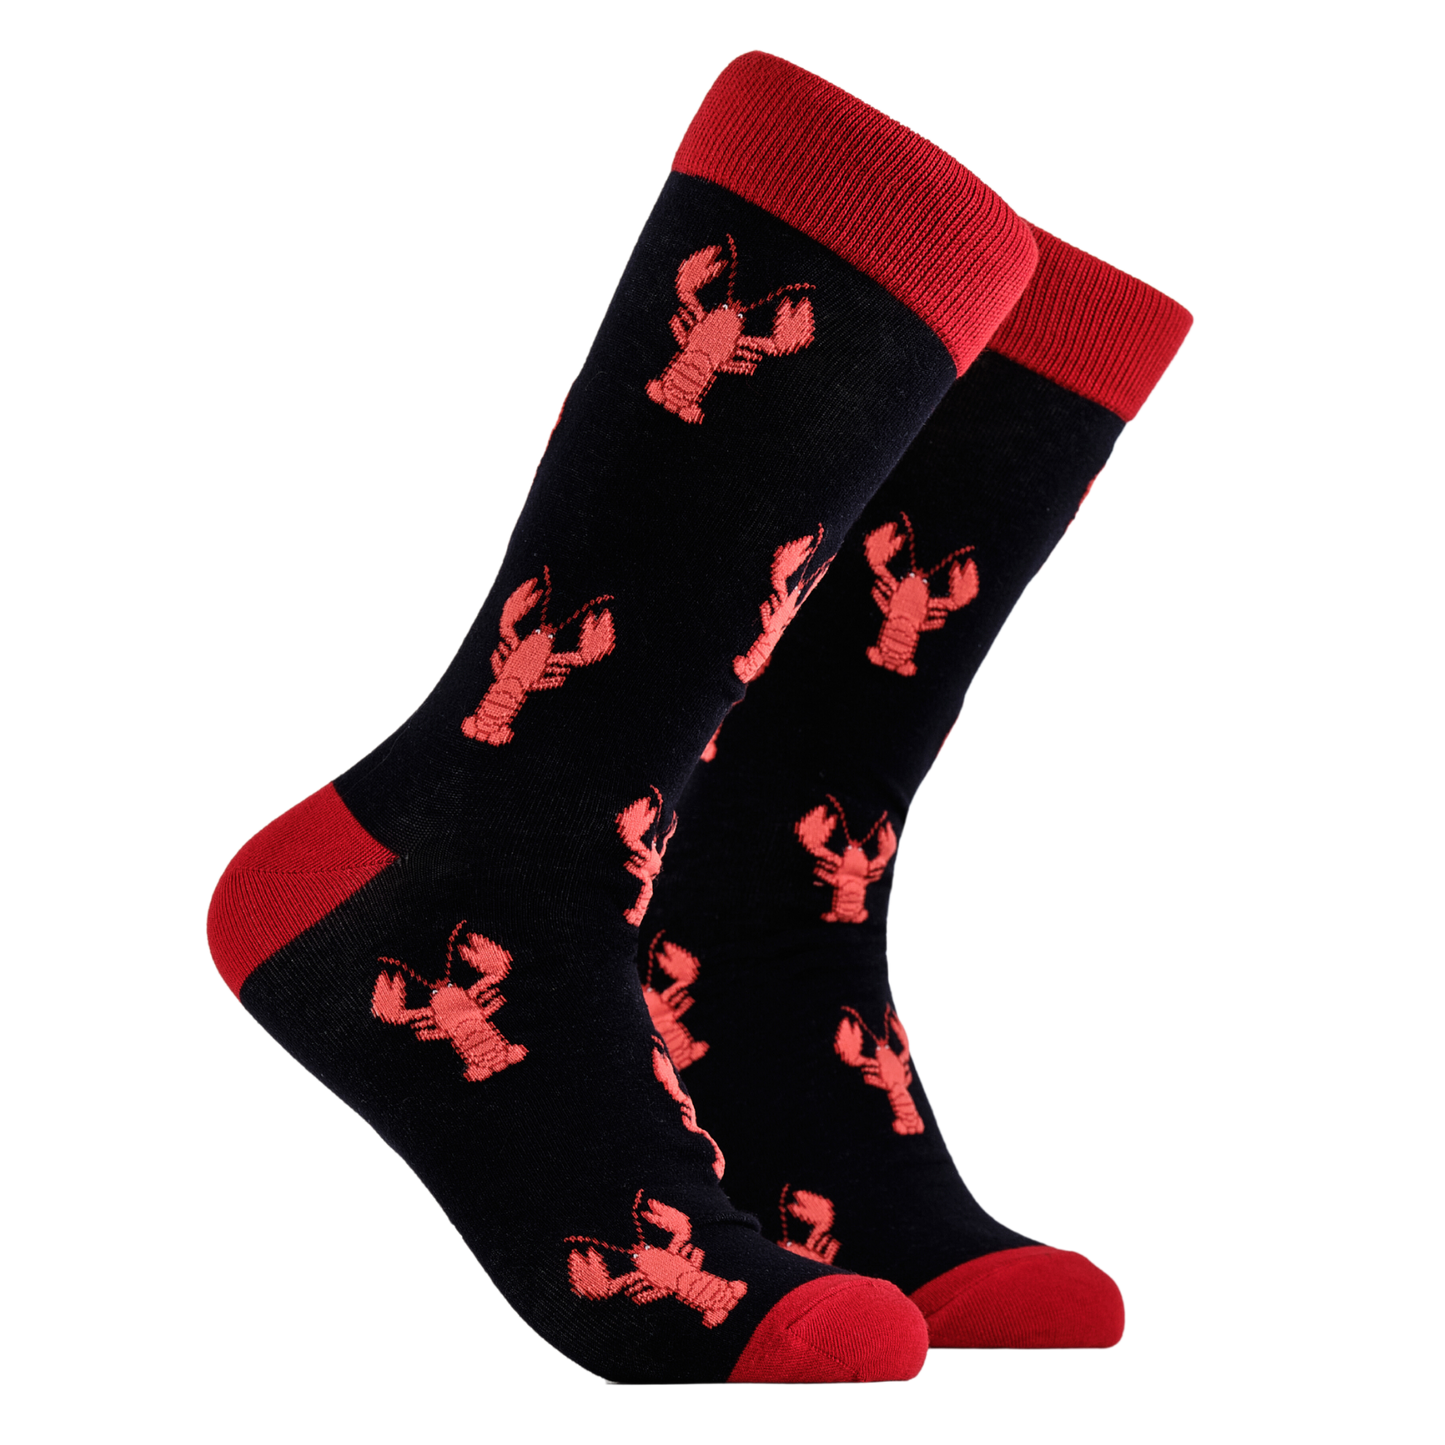 Lobster Socks - The World Is Your Lobster. A pair of socks depicting red lobsters. Black legs, red cuff, heel and toe.